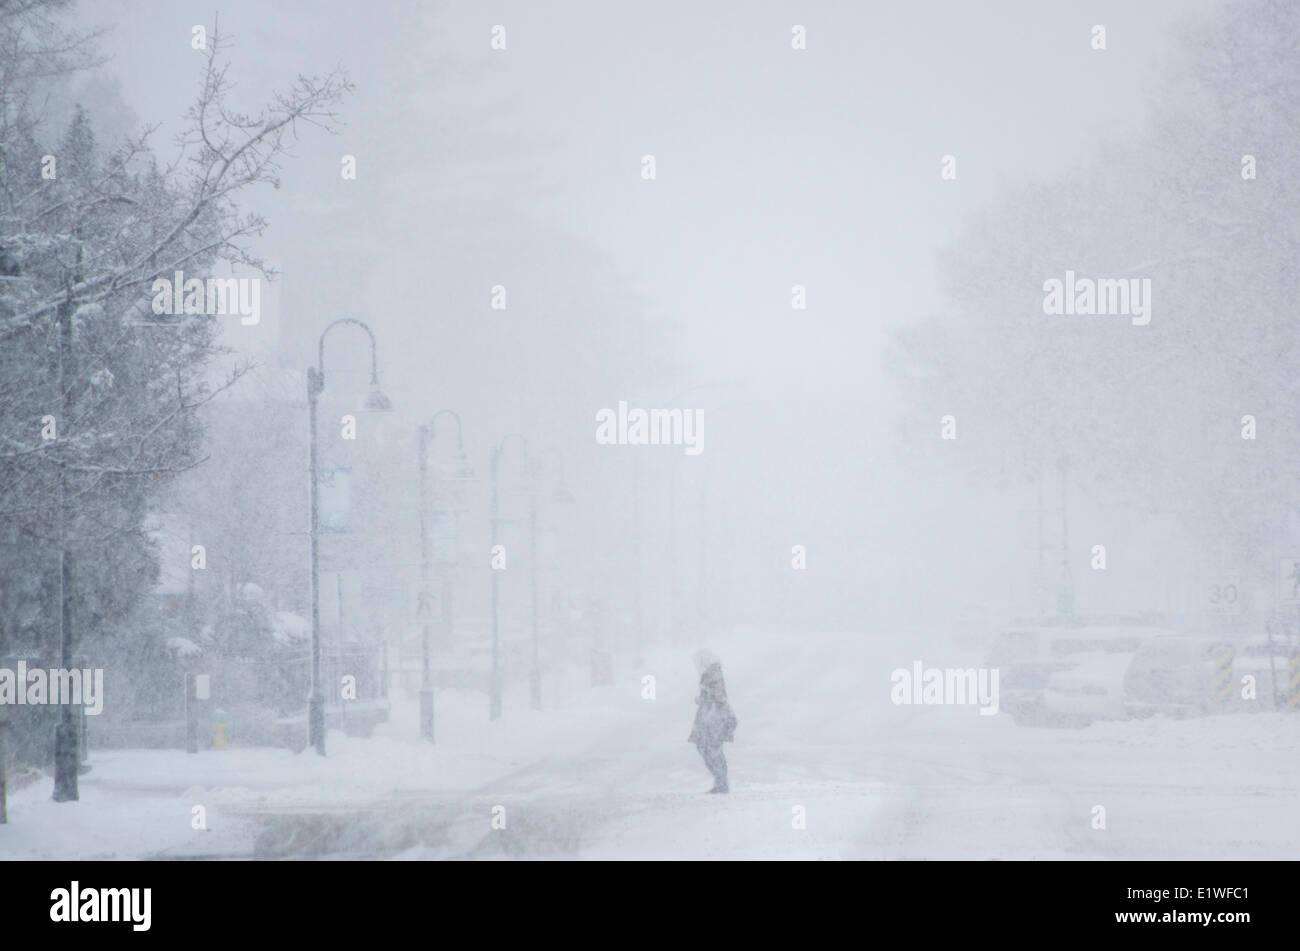 Person crossing a street during a snow storm in winter in Penticton, south Okanagan Valley of British Columbia, Canada. Stock Photo